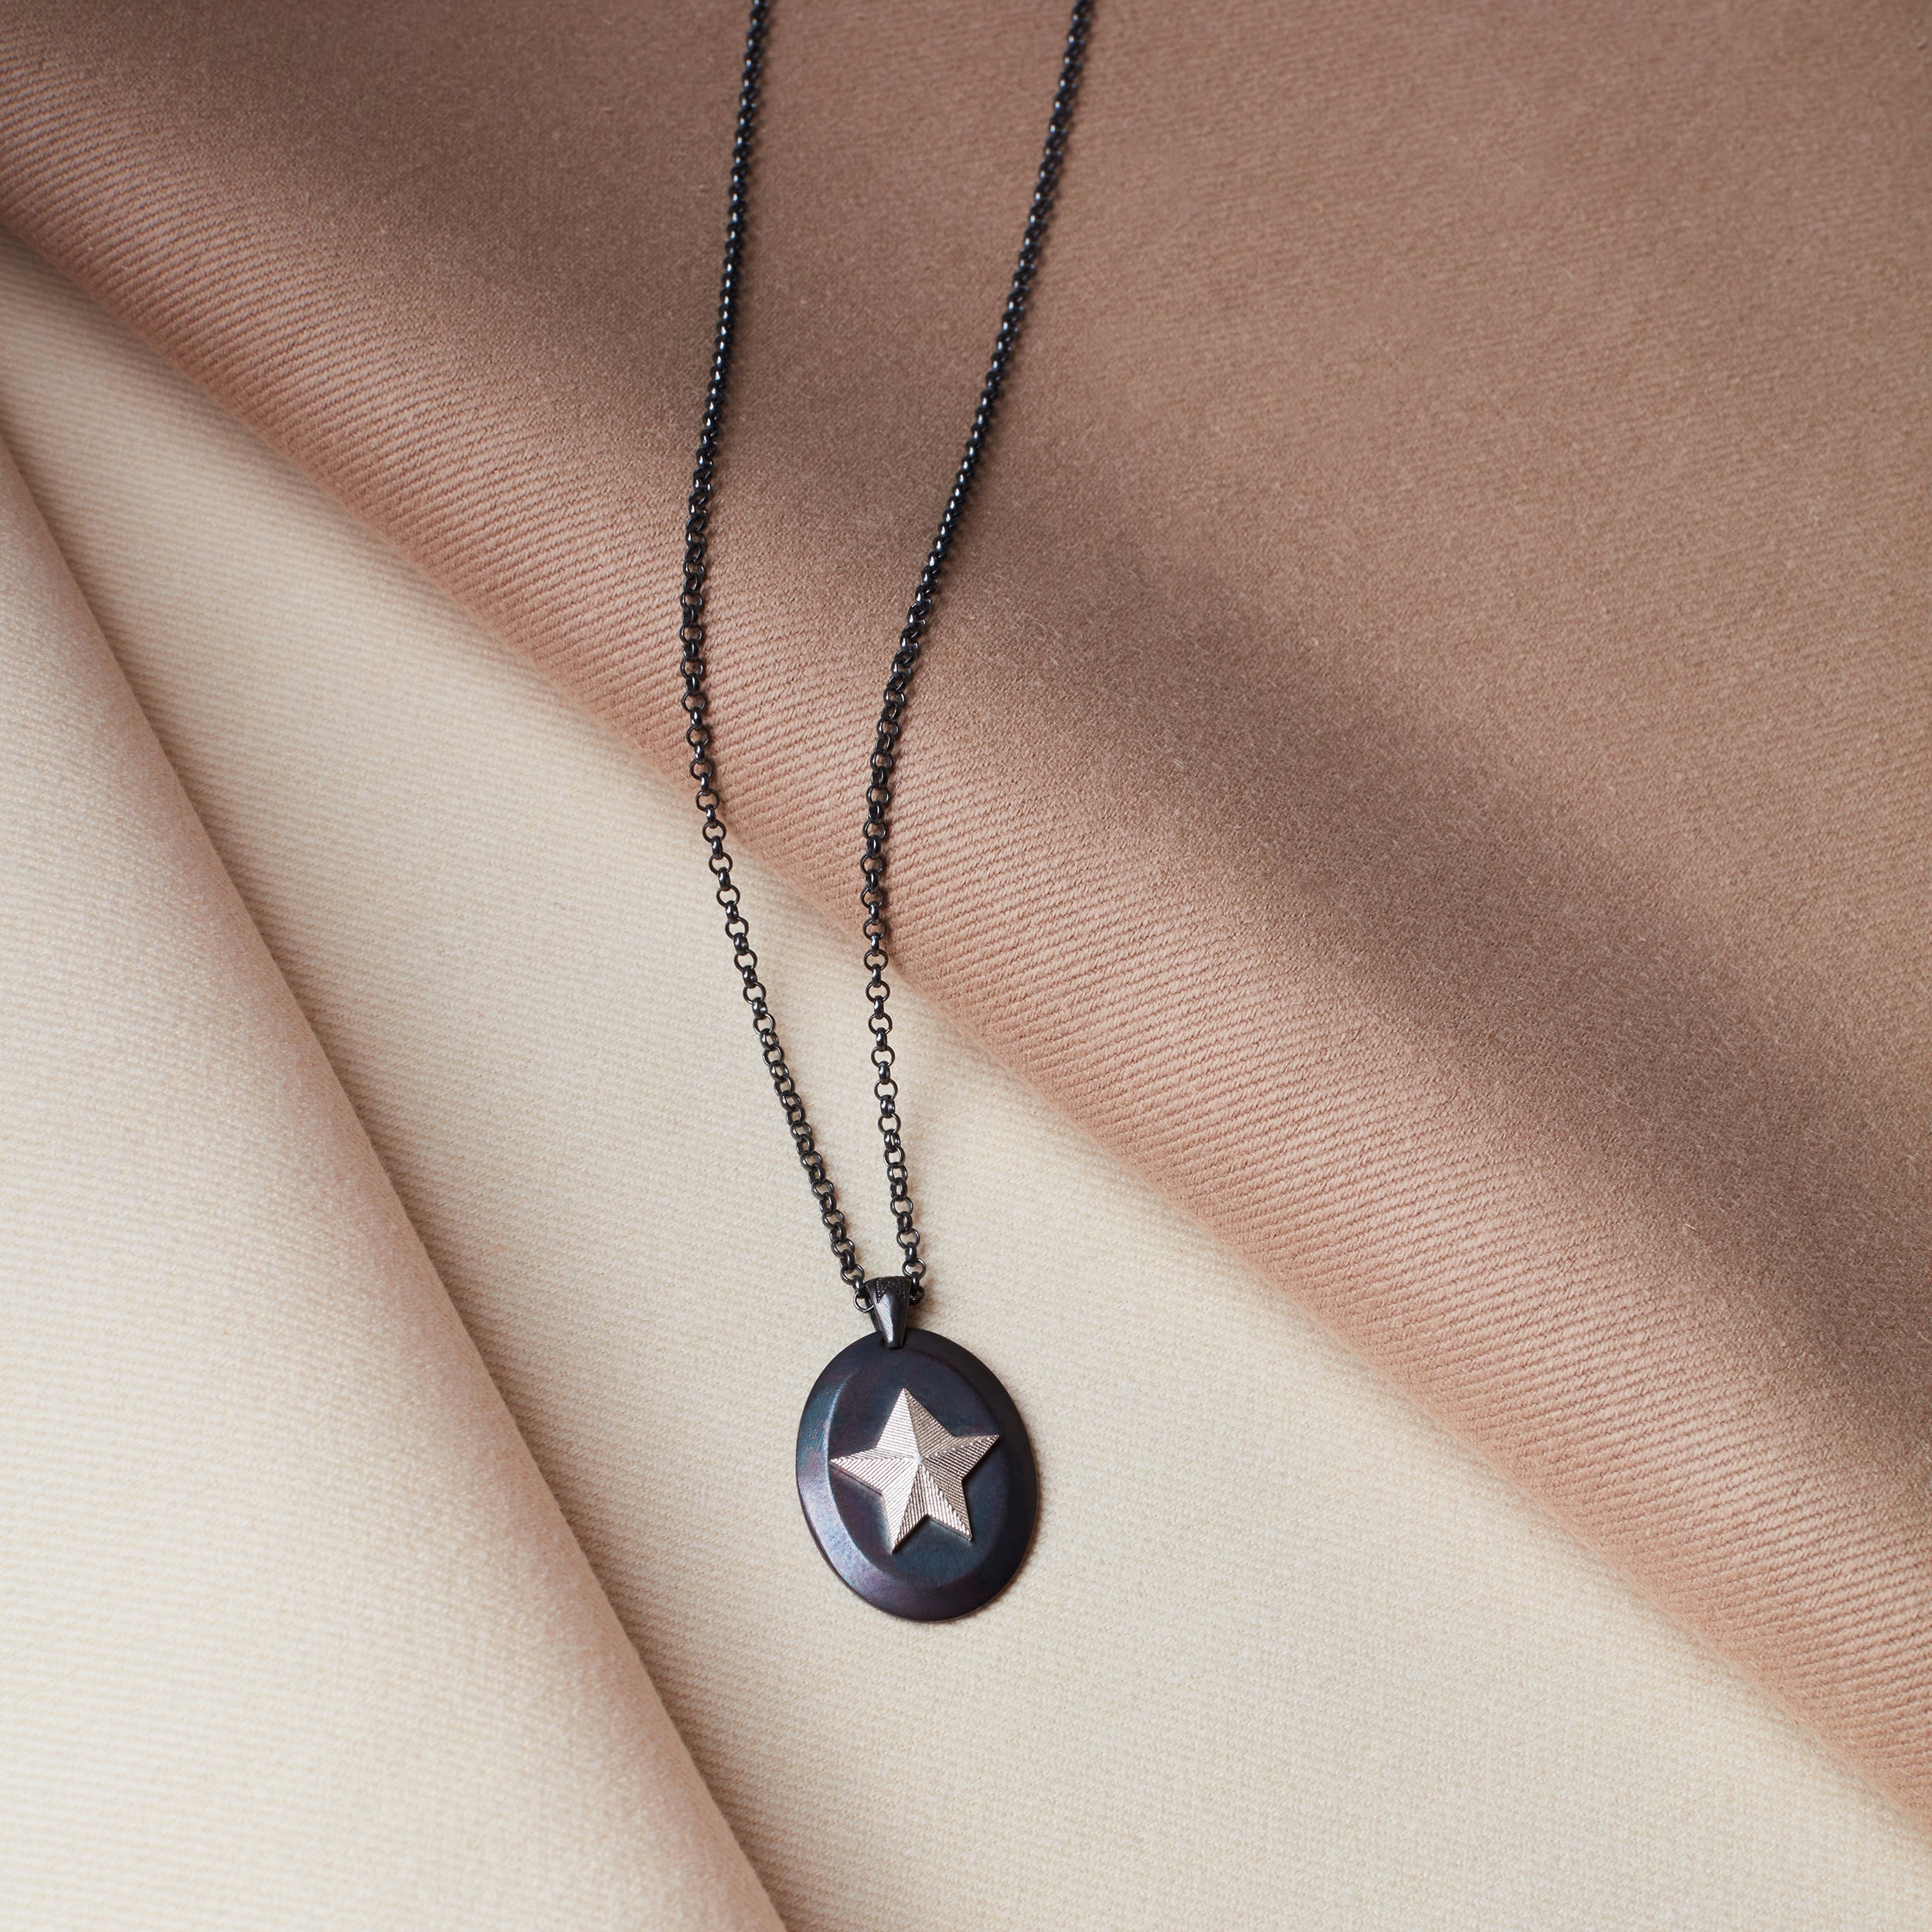 Star Necklace in Oxide